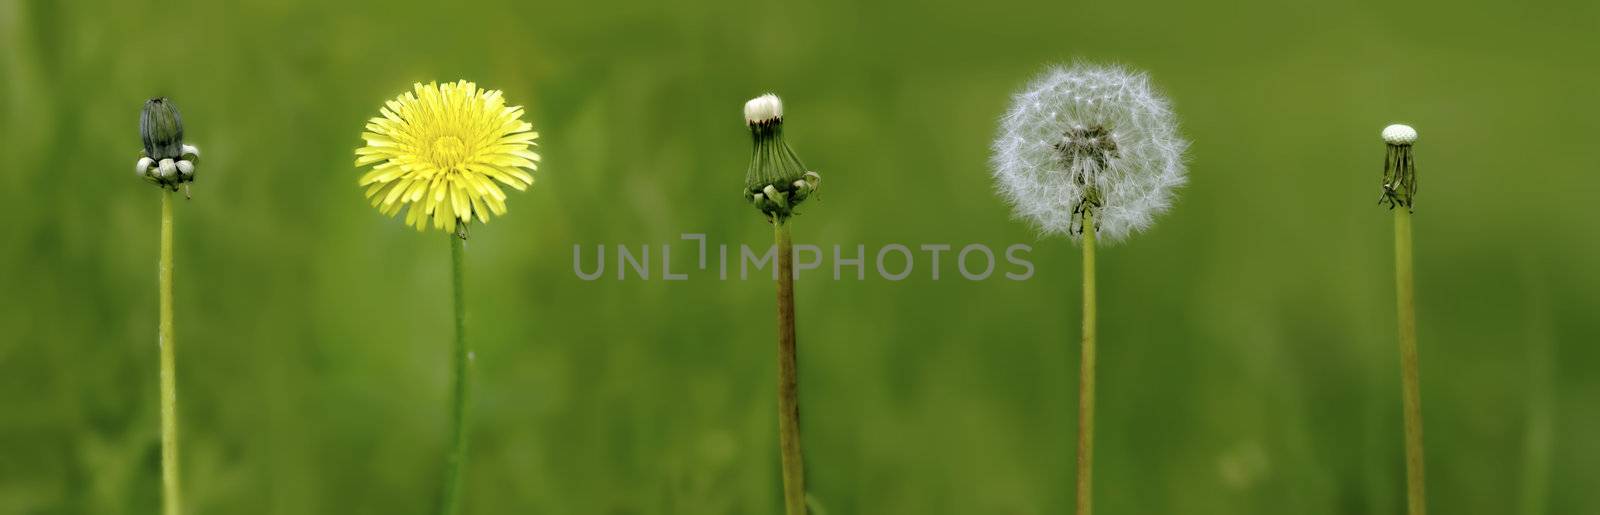 evolution period to lifes of the dandelion